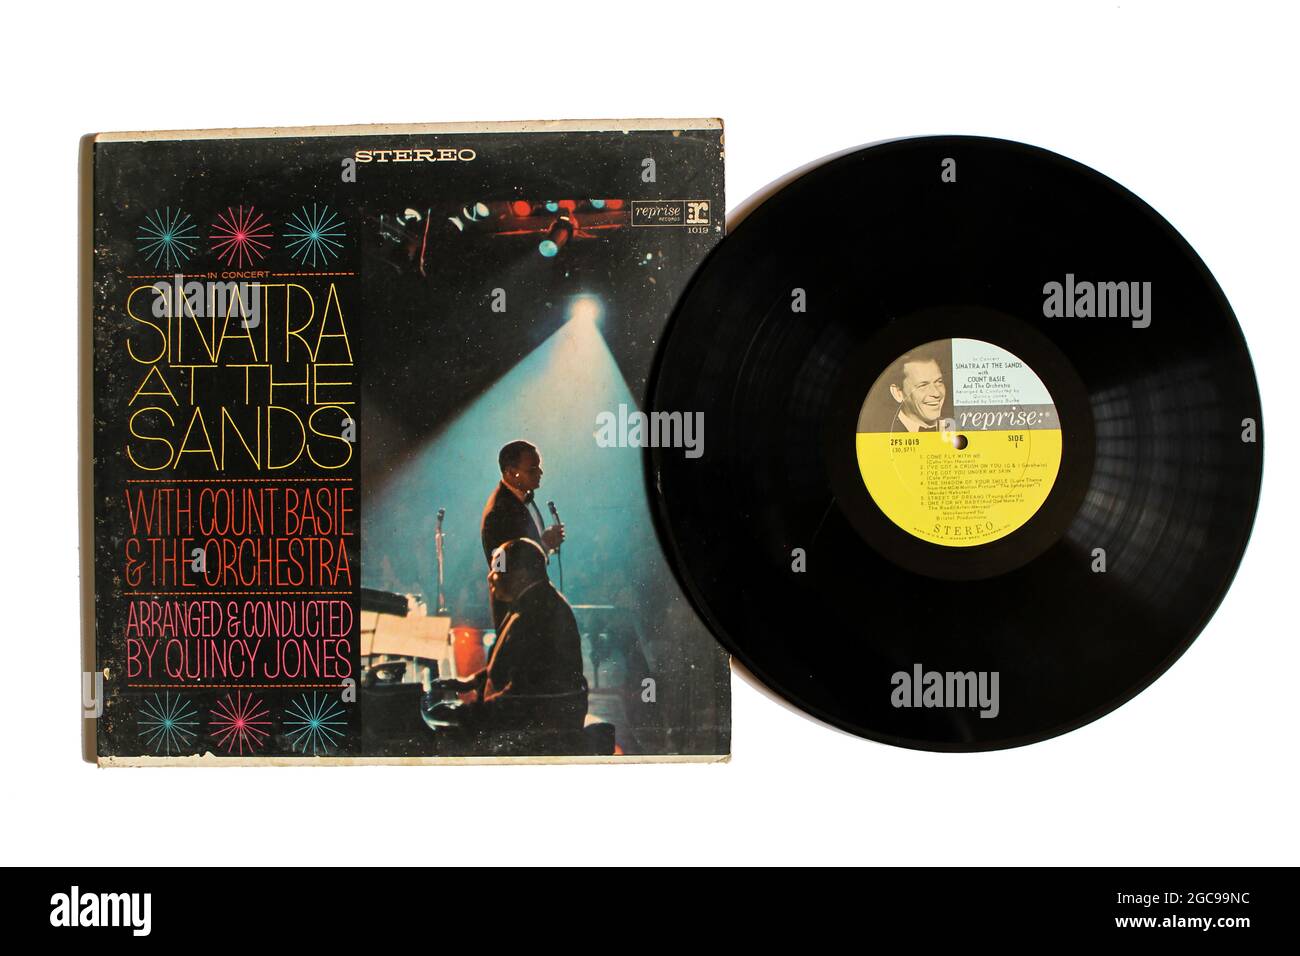 Jazz and easy listening musician, Frank Sinatra live music album on vinyl record LP disc. Titled: Sinatra at the Sands in Las Vegas album cover Stock Photo